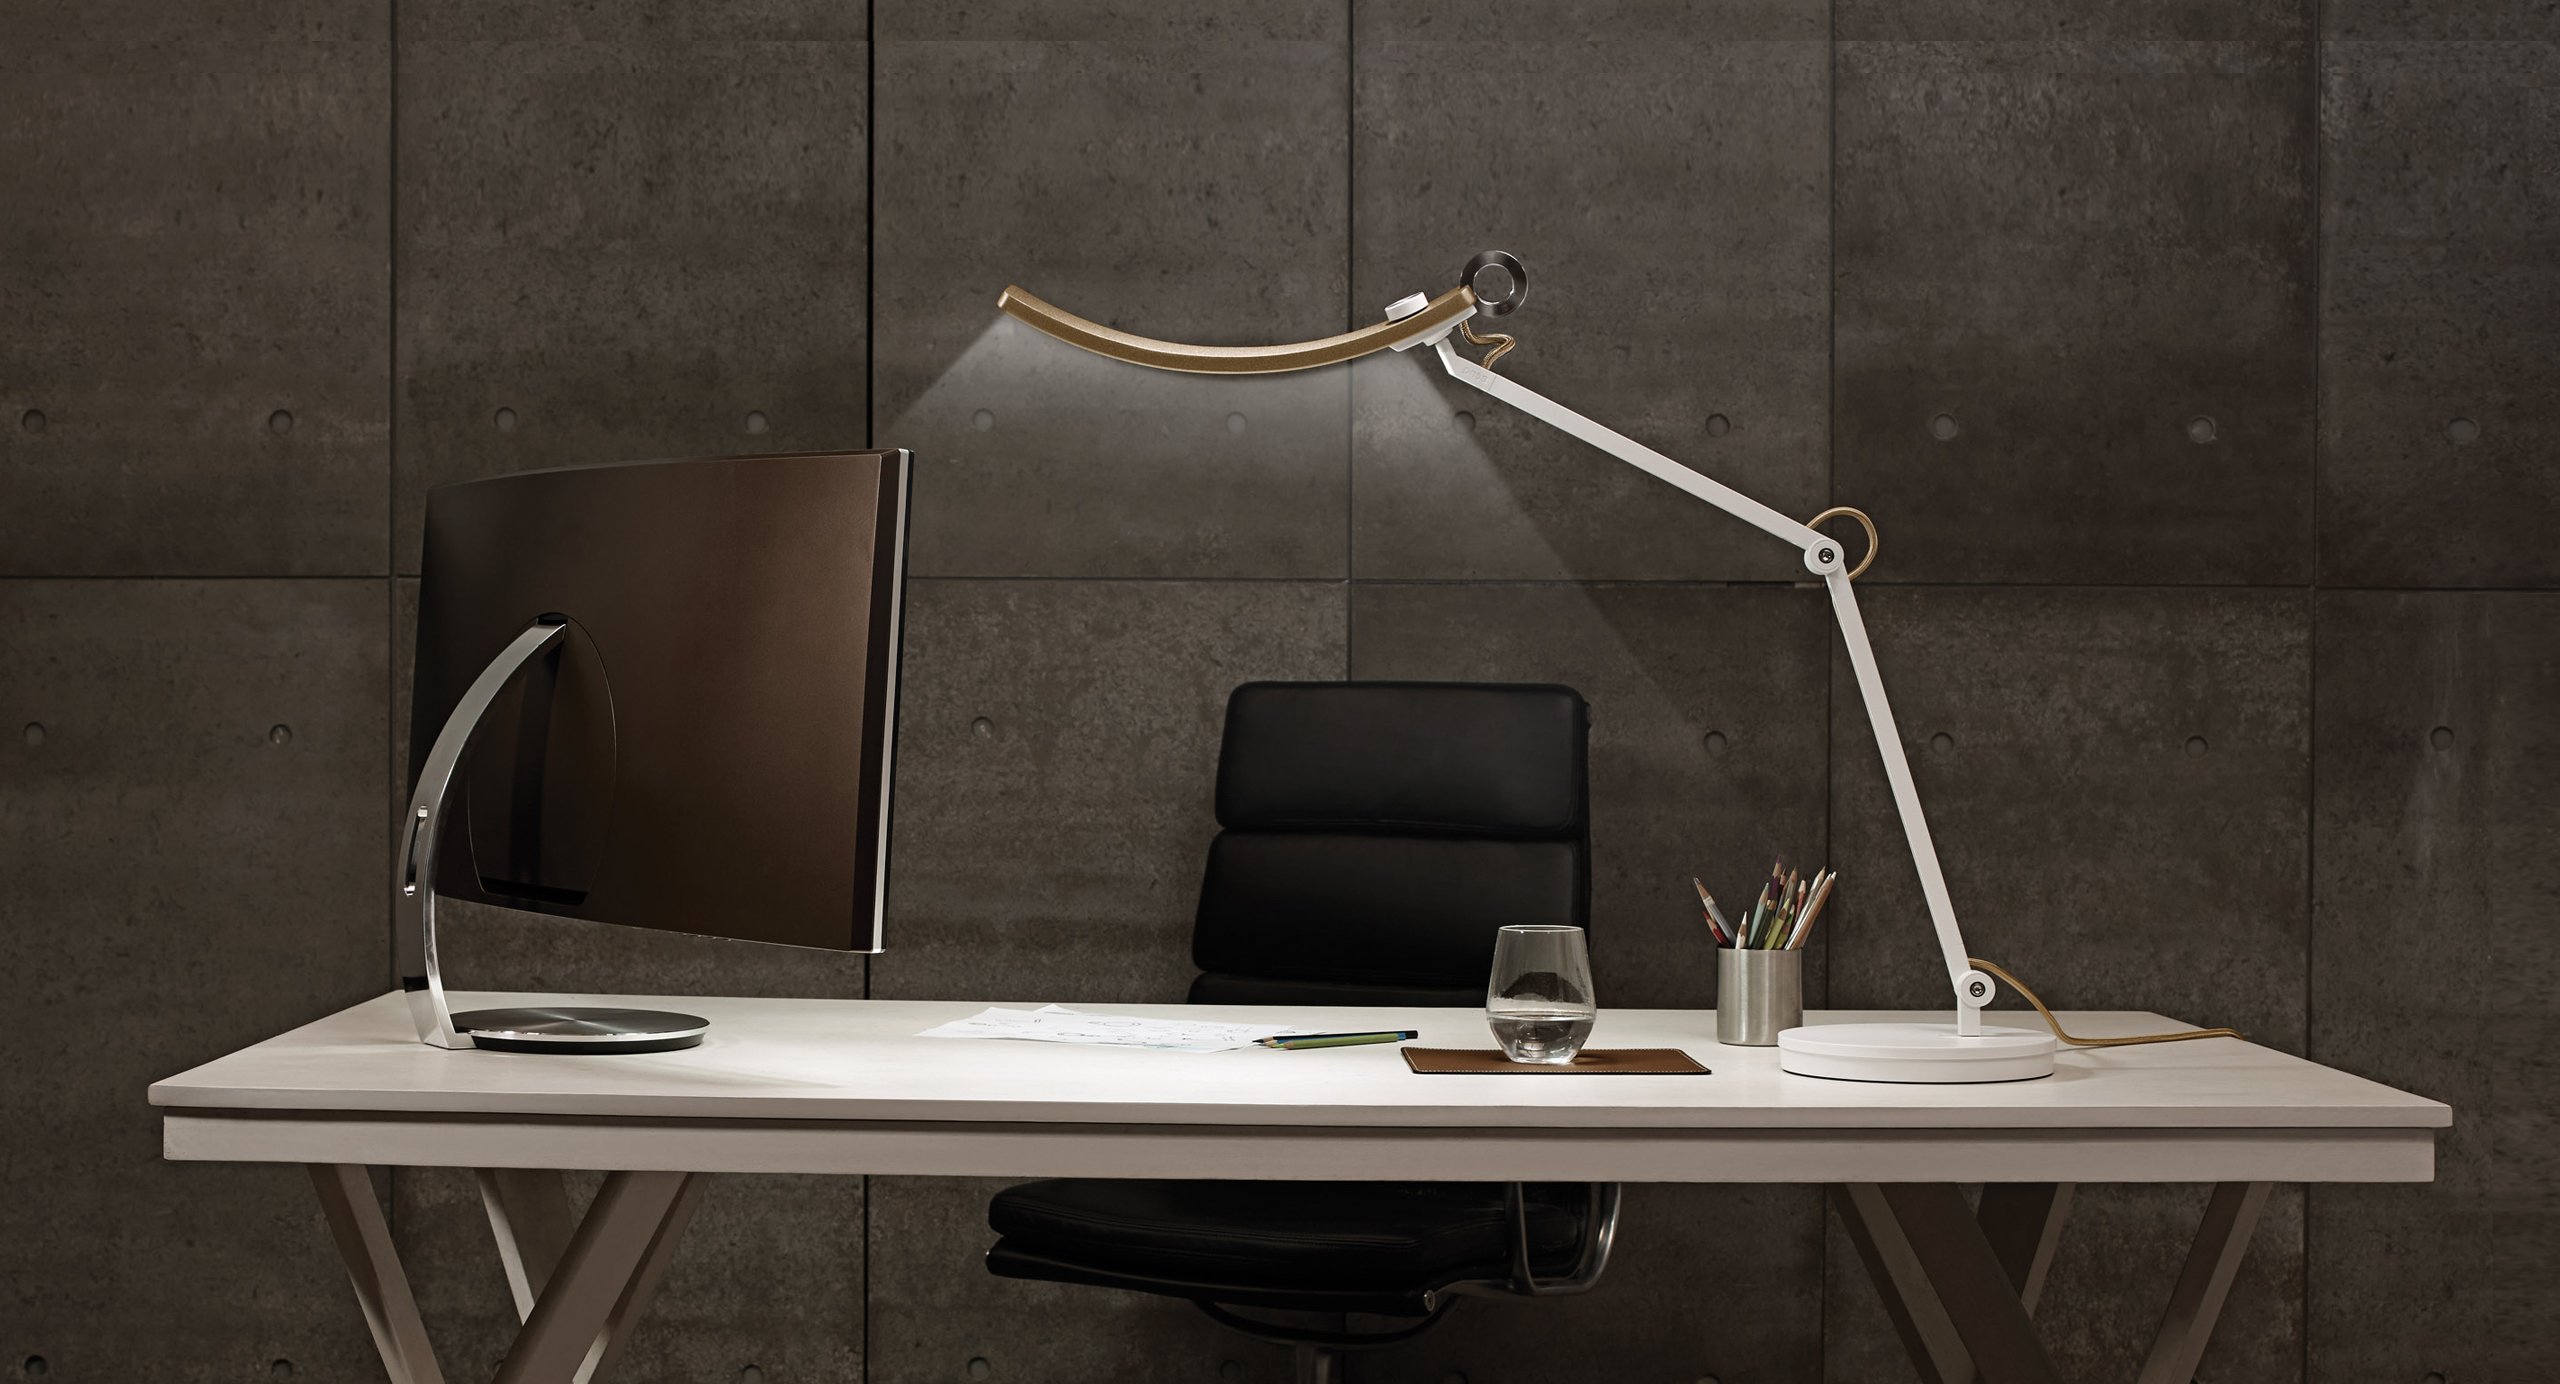 The needs of versatility and larger lighting area make desk lamp a better option when it comes to lighting.